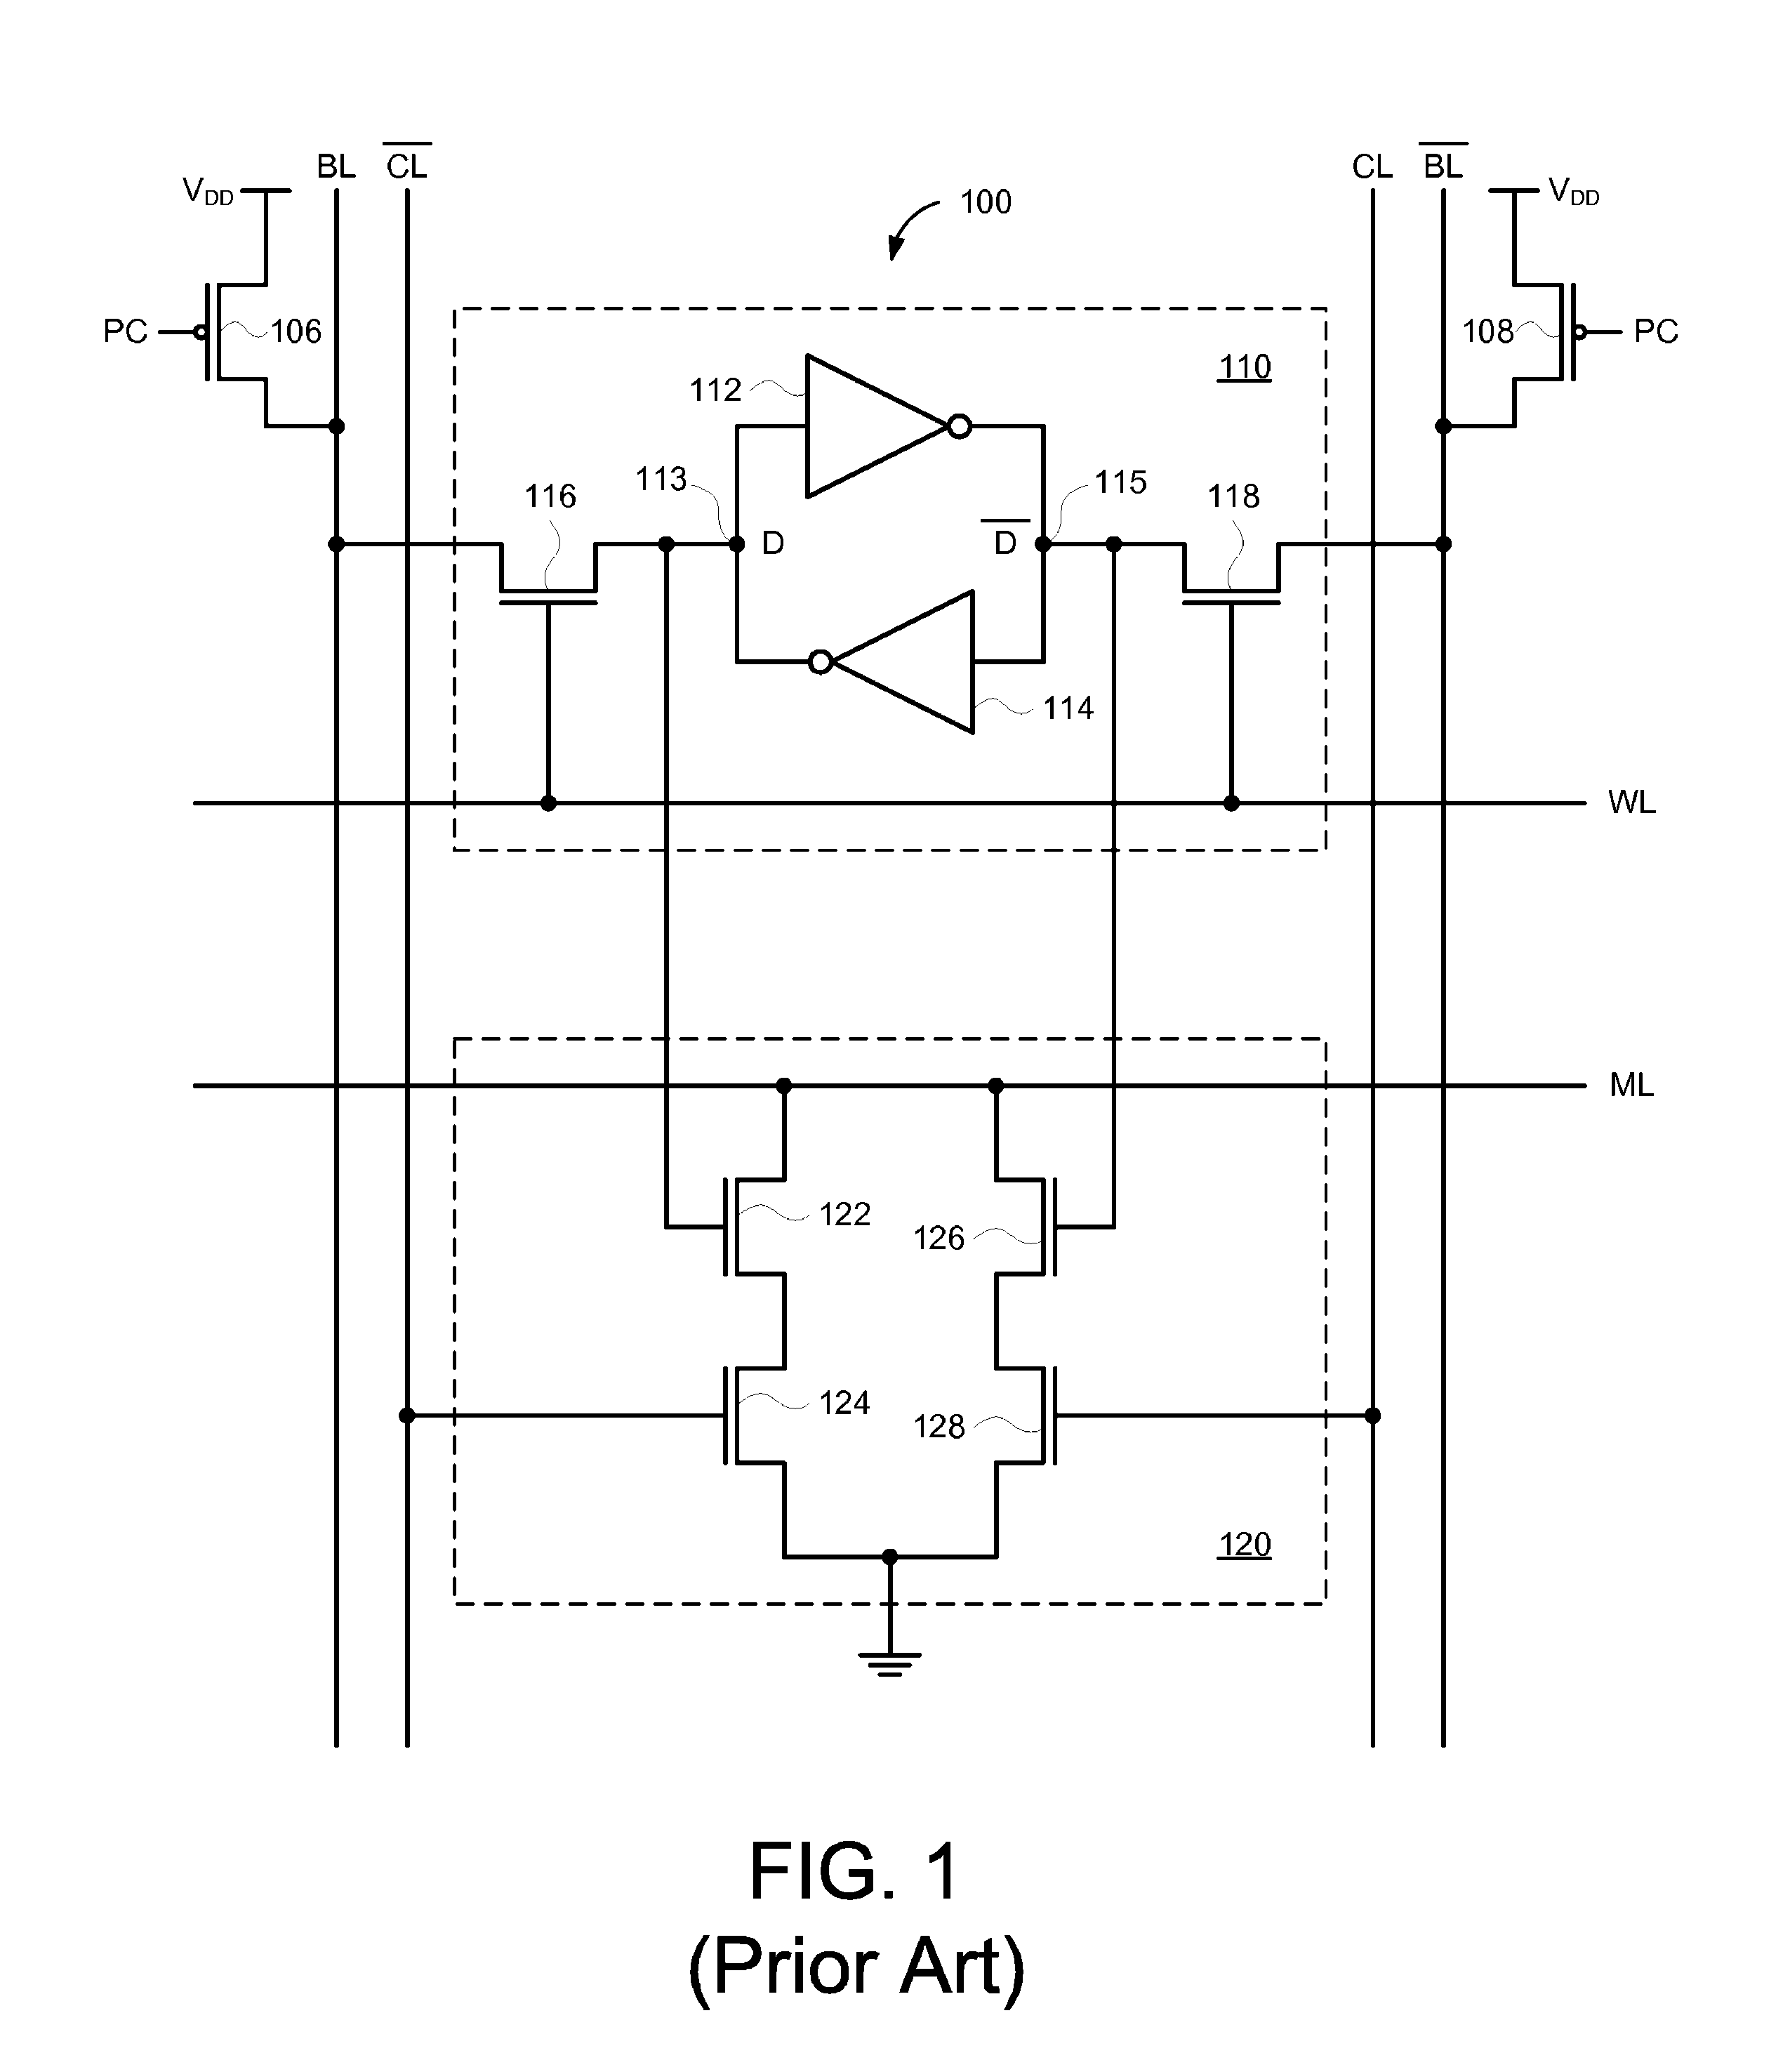 Content addressable memory device having spin torque transfer memory cells